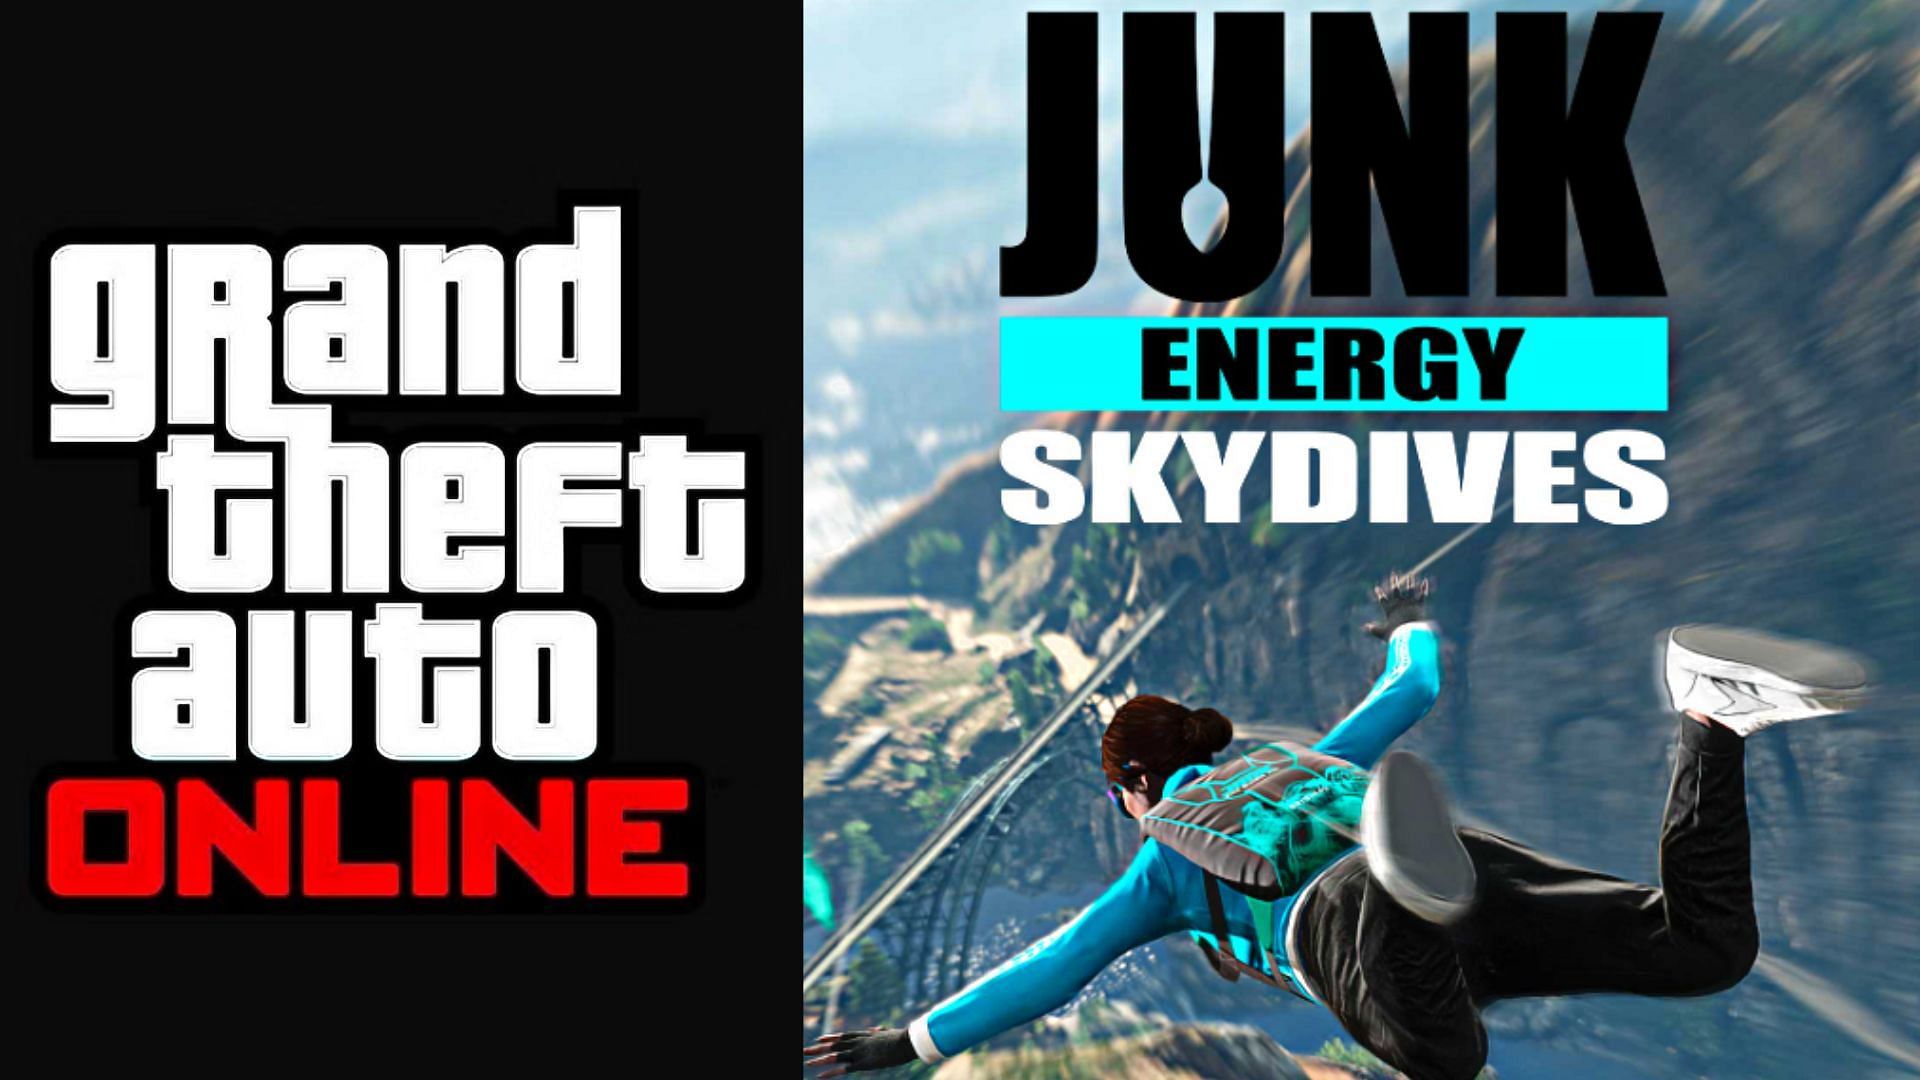 Junk Energy Skydives challenges are a Freemode Event (image via Rockstar Games)